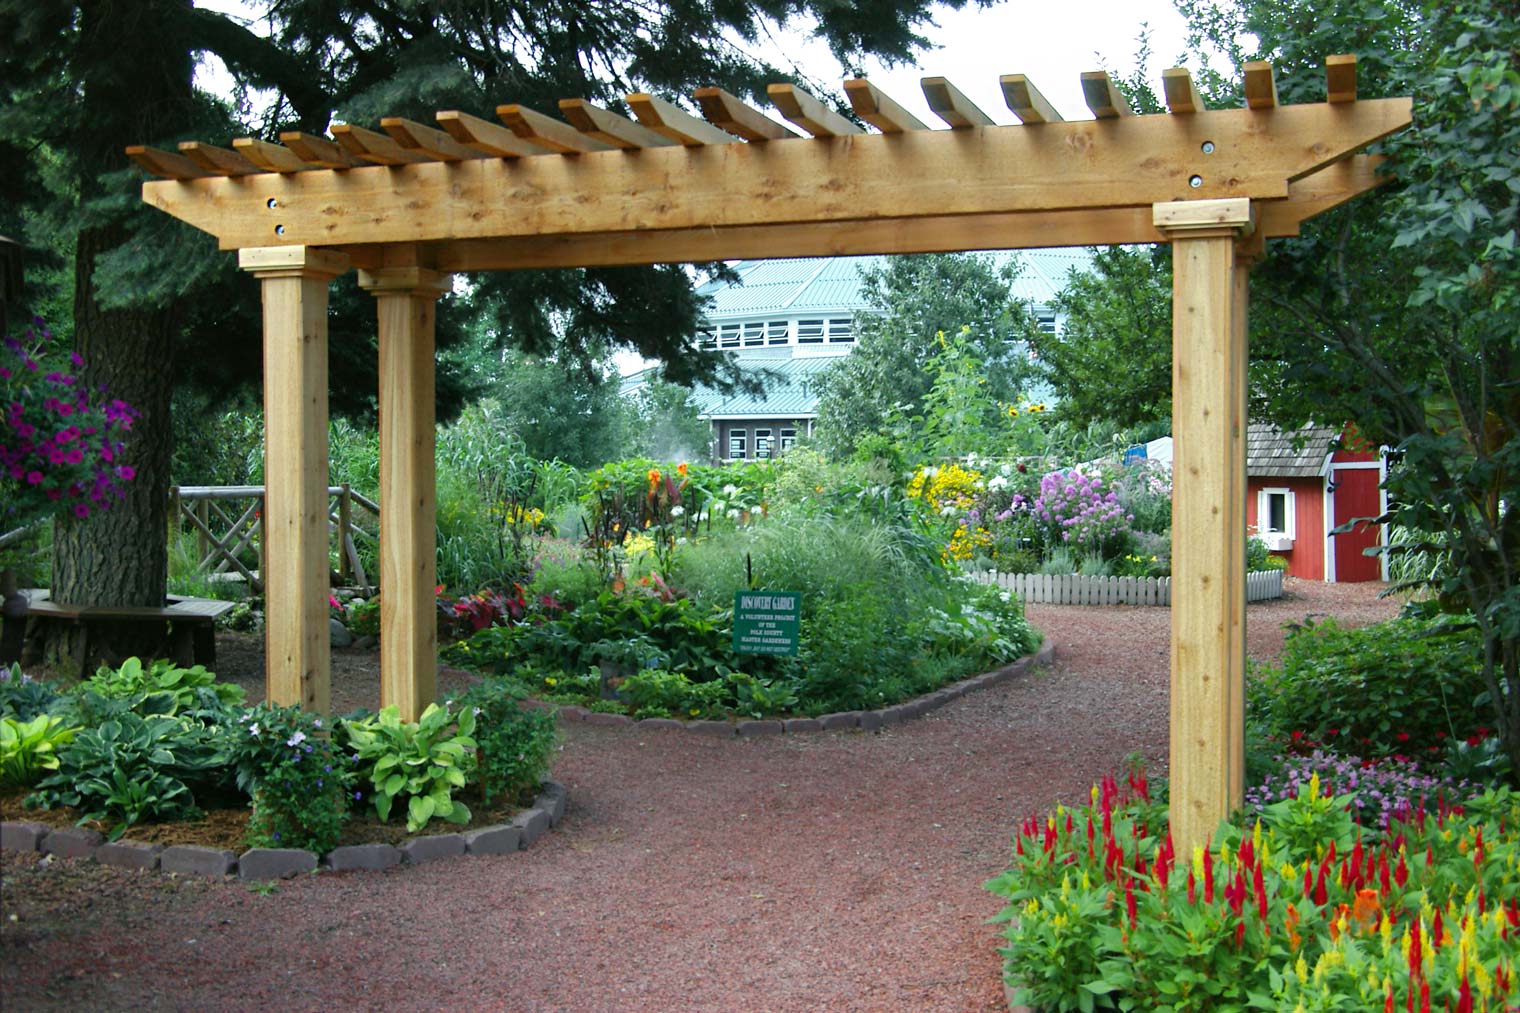 At the Iowa State Fair Discovery Garden, hundreds of thousands of people have walked under the arbor designed and built by Silent Rivers.